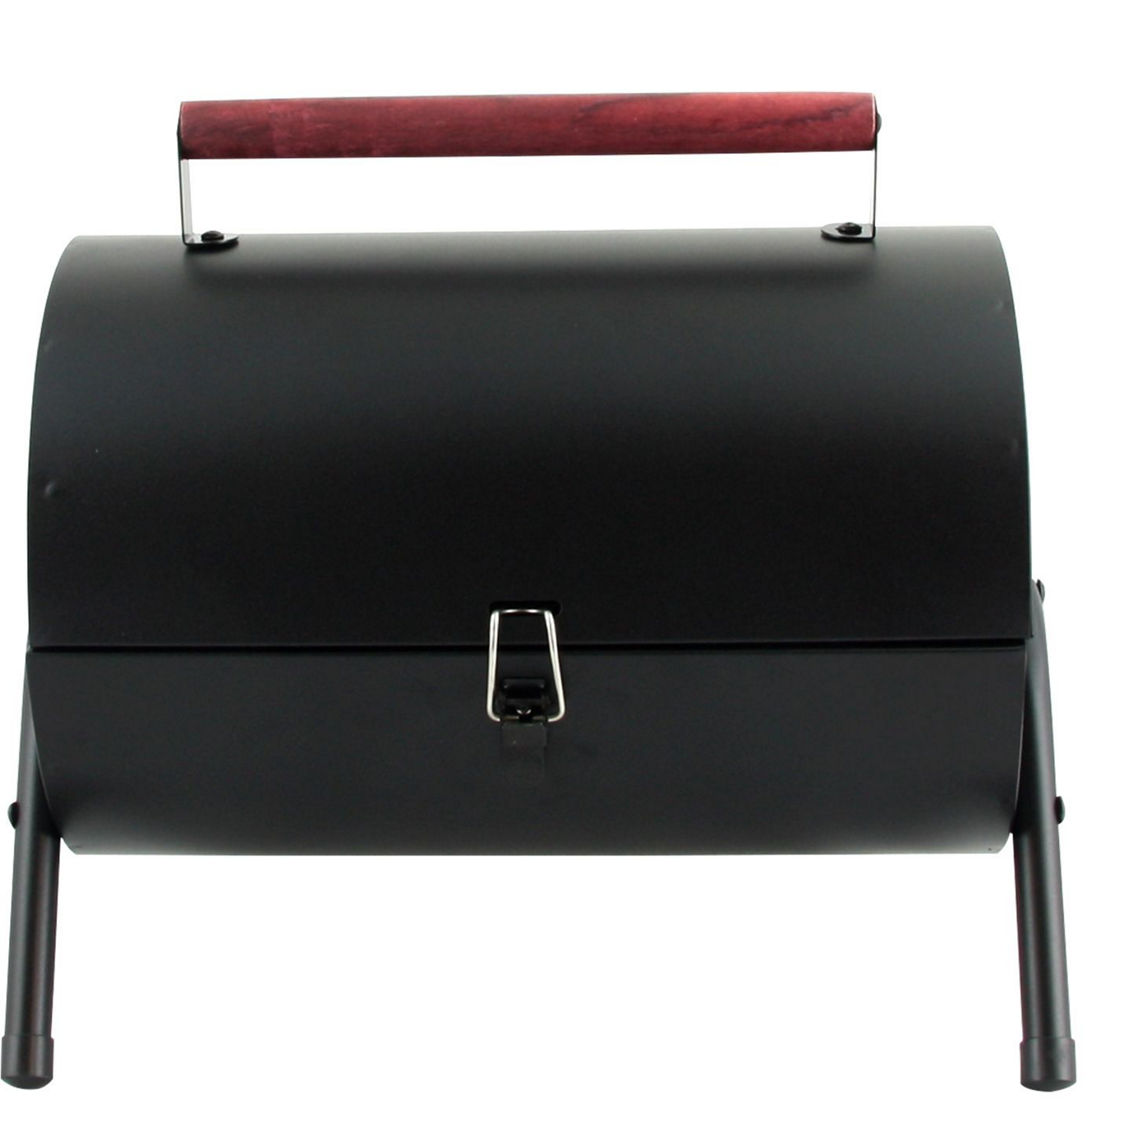 Gibson Home Delwin Carbon Steel Barrel BBQ in Black with Burgundy Wood Handle - Image 3 of 4